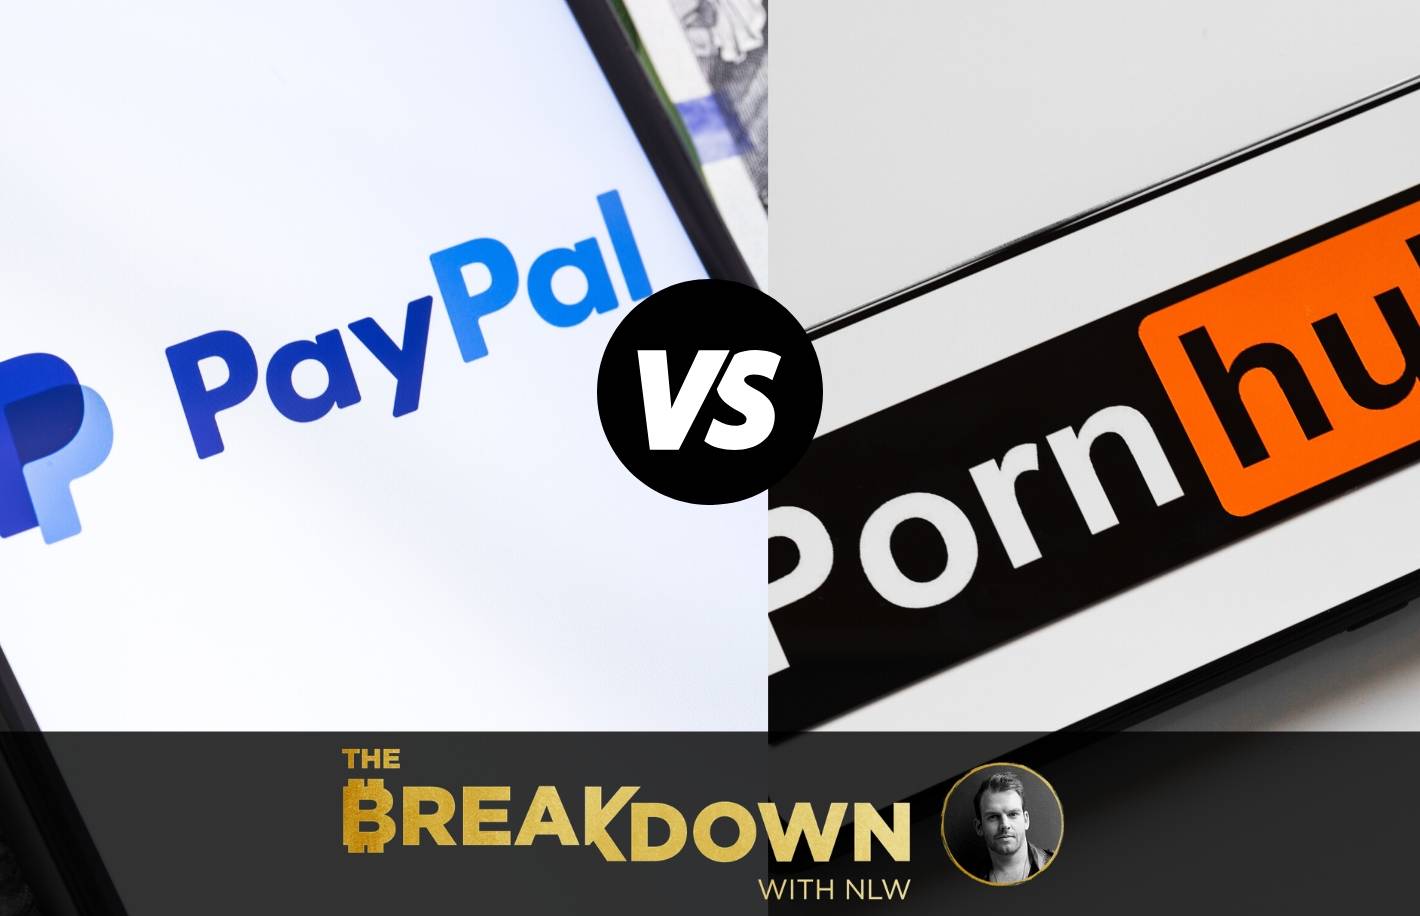 Will-mass-adoption-be-more-paypal-or-pornhub?